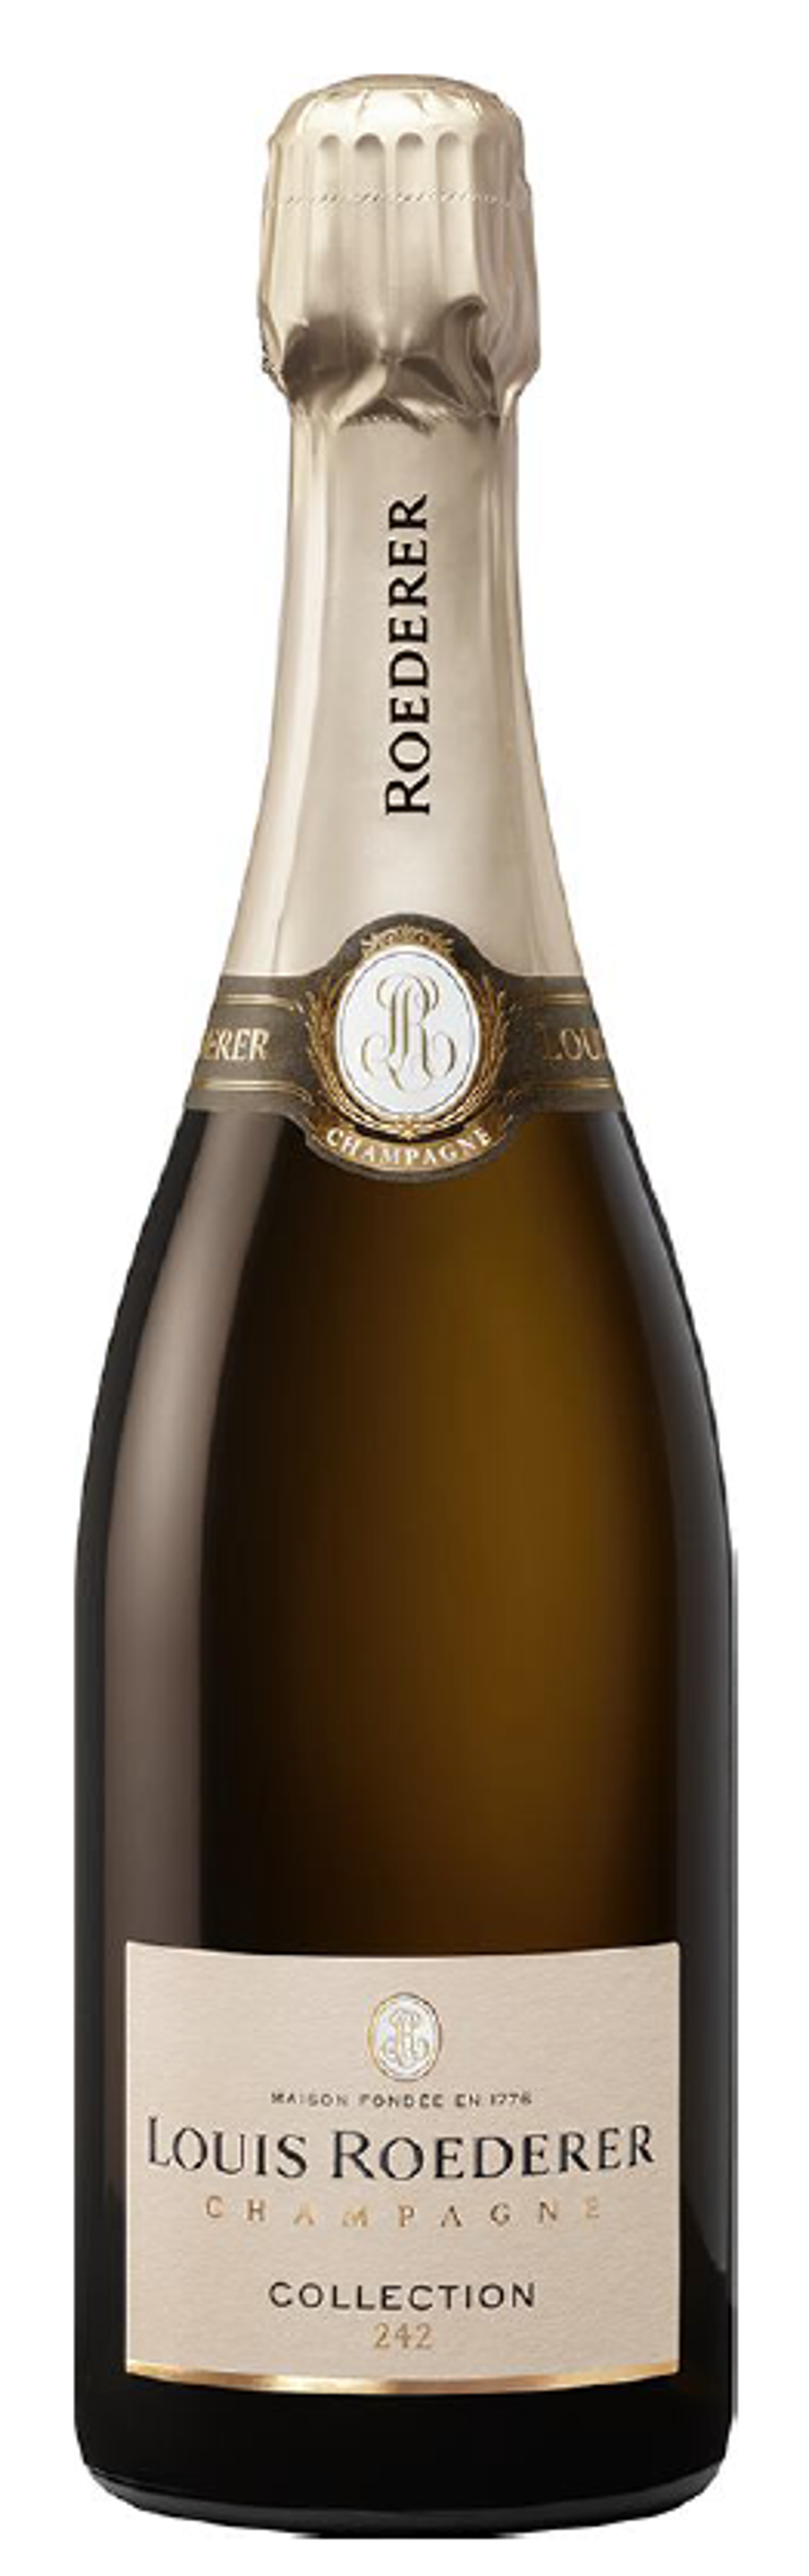 Champagner Louis Roederer Champagner Collection 243